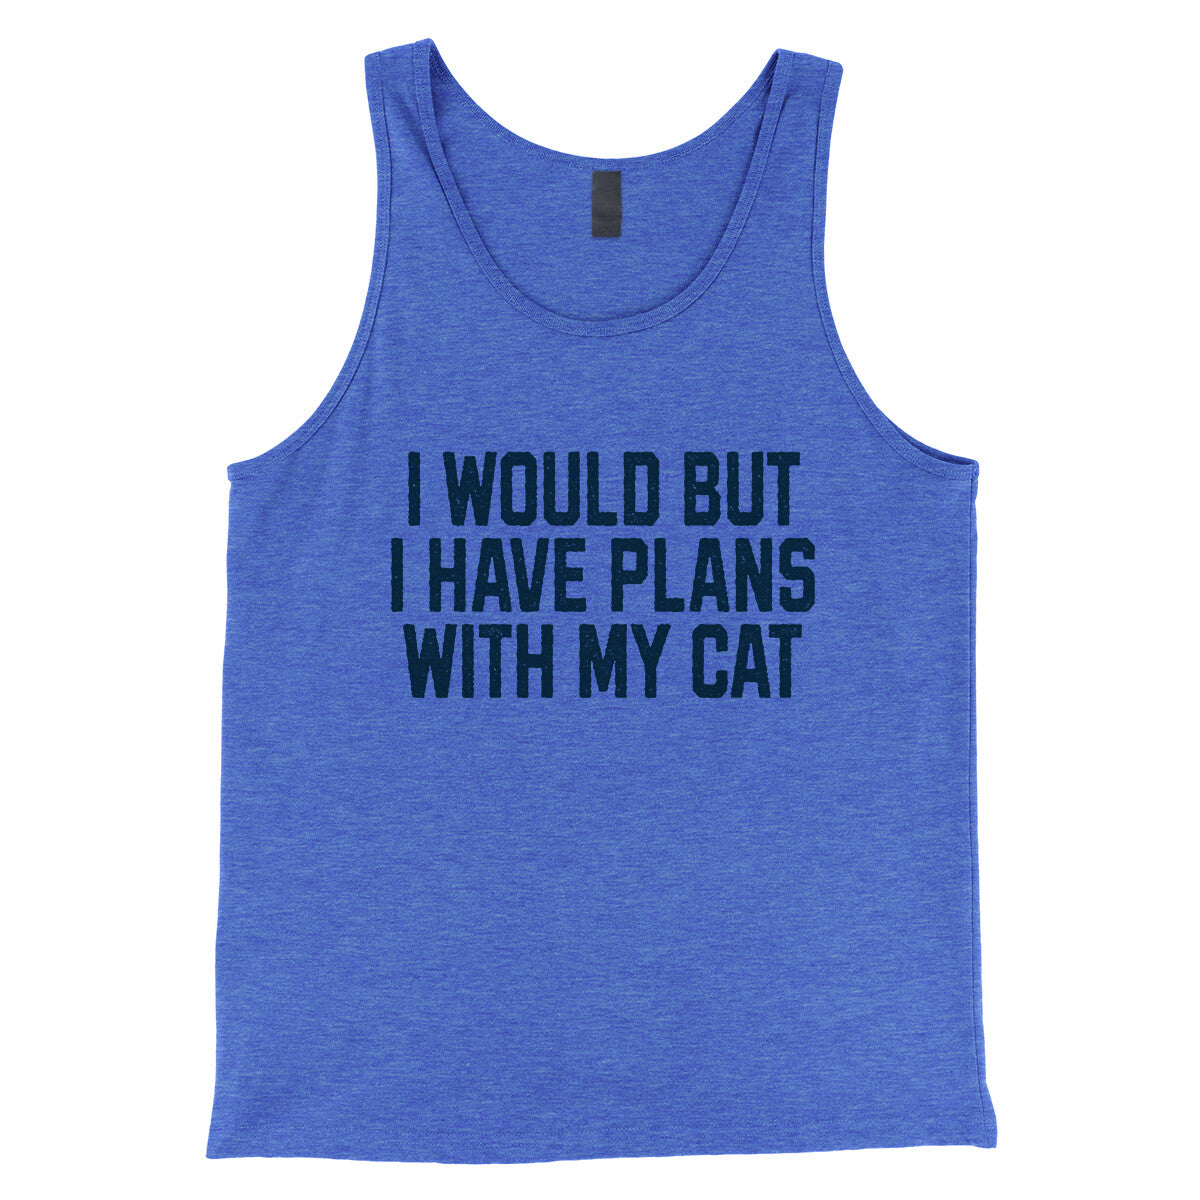 I Would but I Have Plans with My Cat in True Royal TriBlend Color